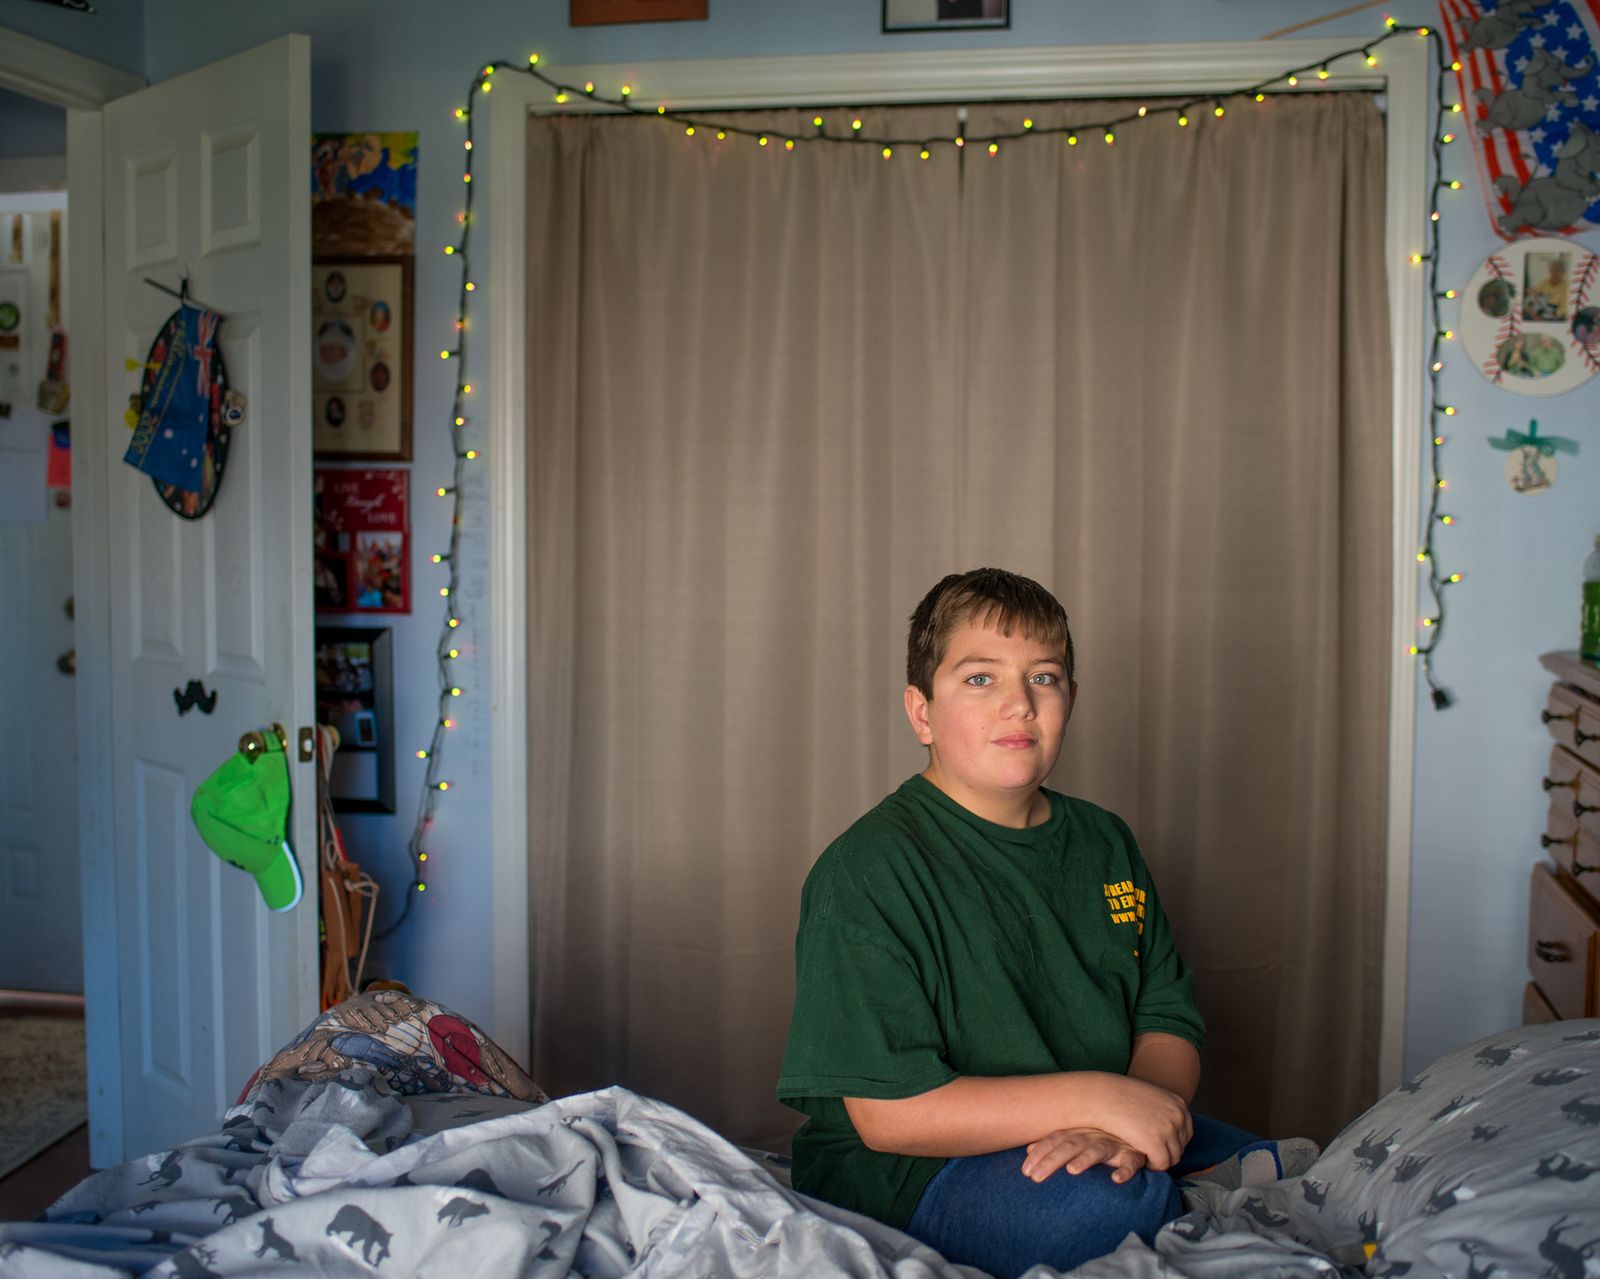 © Mary Berridge - Image from the Visible Spectrum: Portraits from the World of Autism photography project